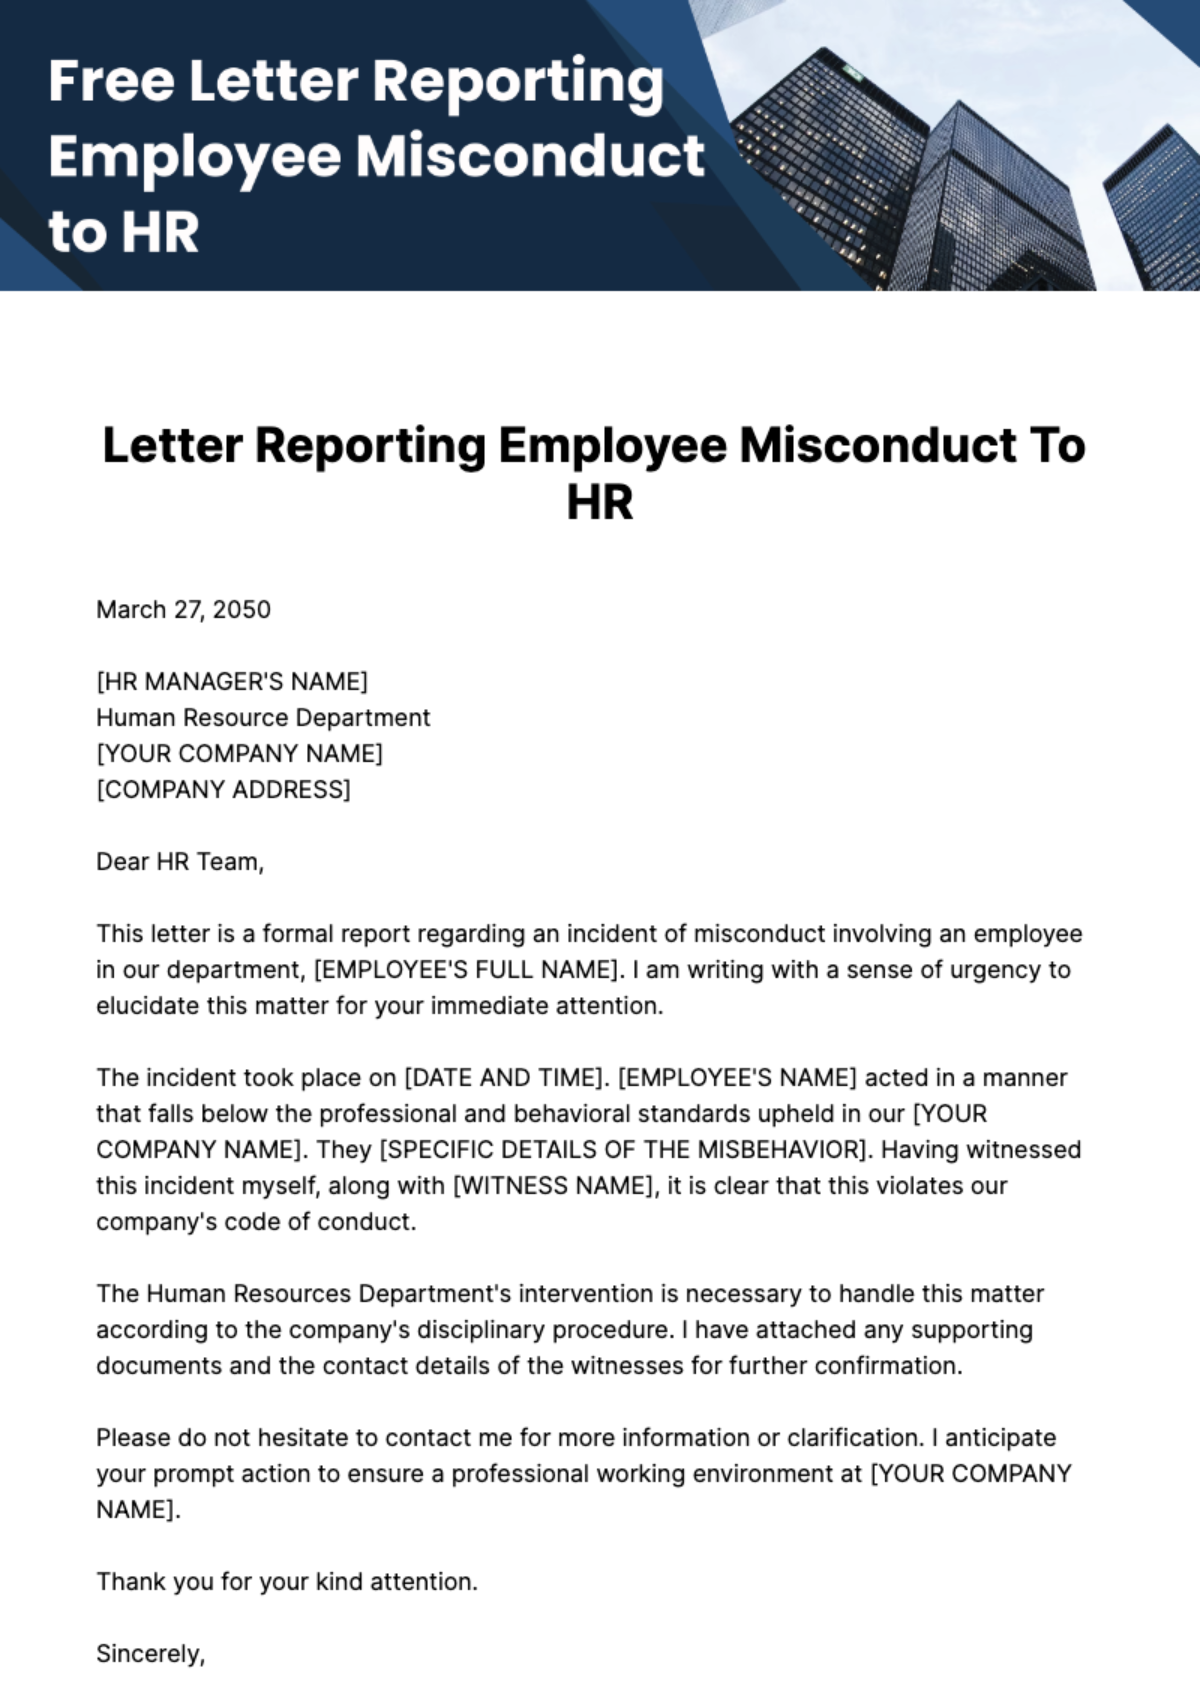 Free Letter Reporting Employee Misconduct to HR Template